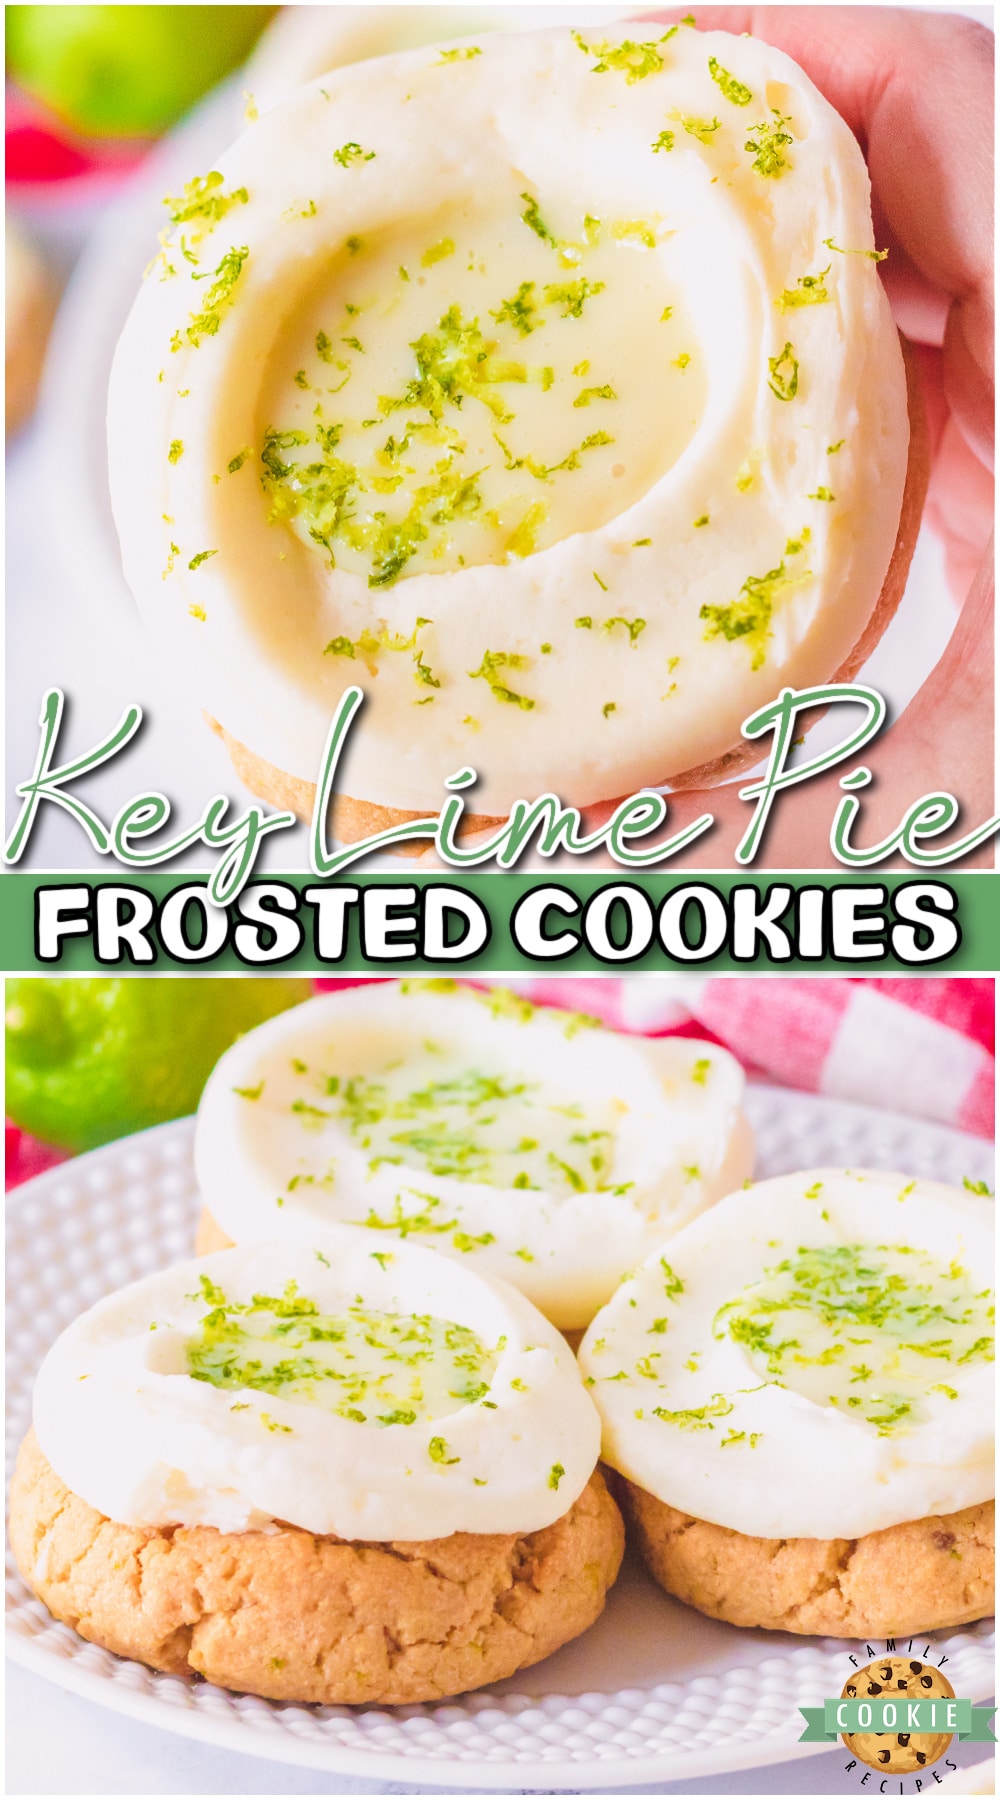 Key lime pie cookies made with a sugar cookie base & topped with key lime filling and a lime buttercream! Tangy, sweet lime cookies that are perfect for summer. via @buttergirls